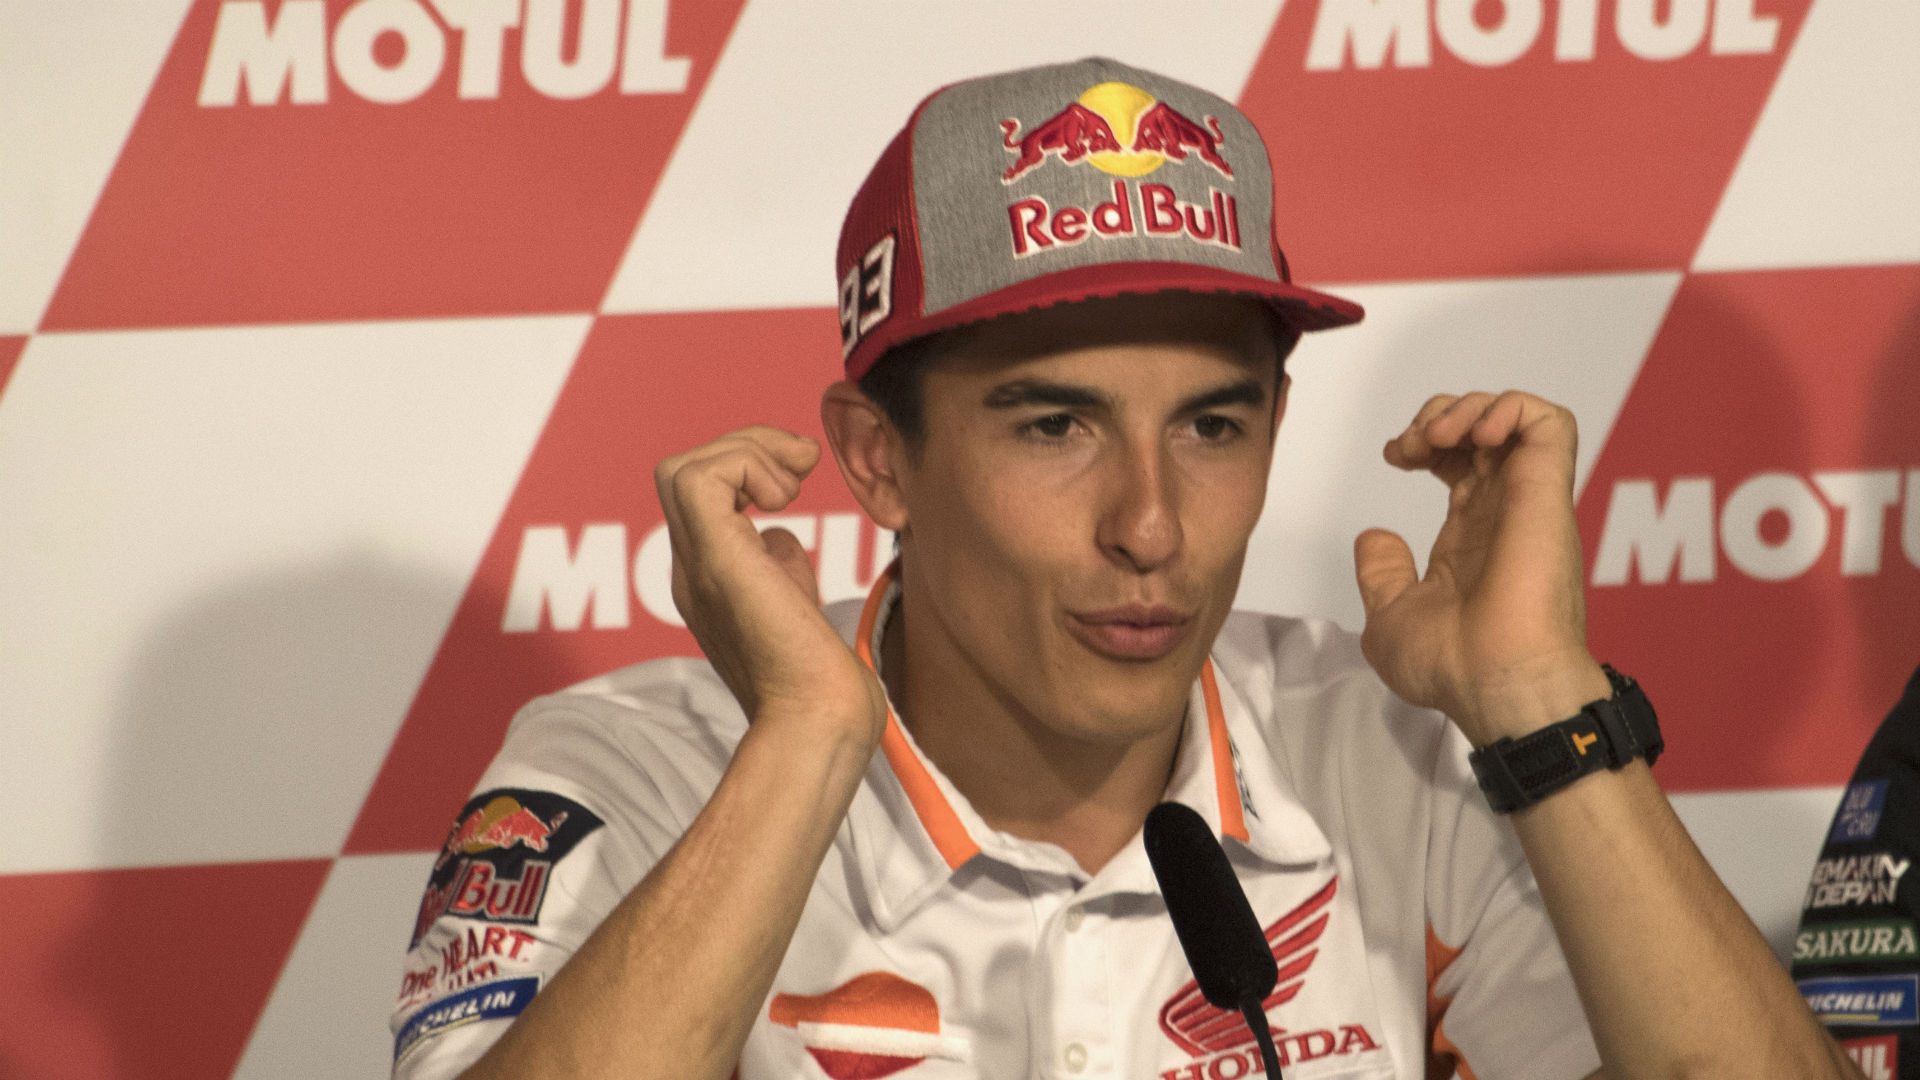 Although Marc Marquez emerged victorious at the Dutch TT to extend his MotoGP lead, the race did not go as he expected.